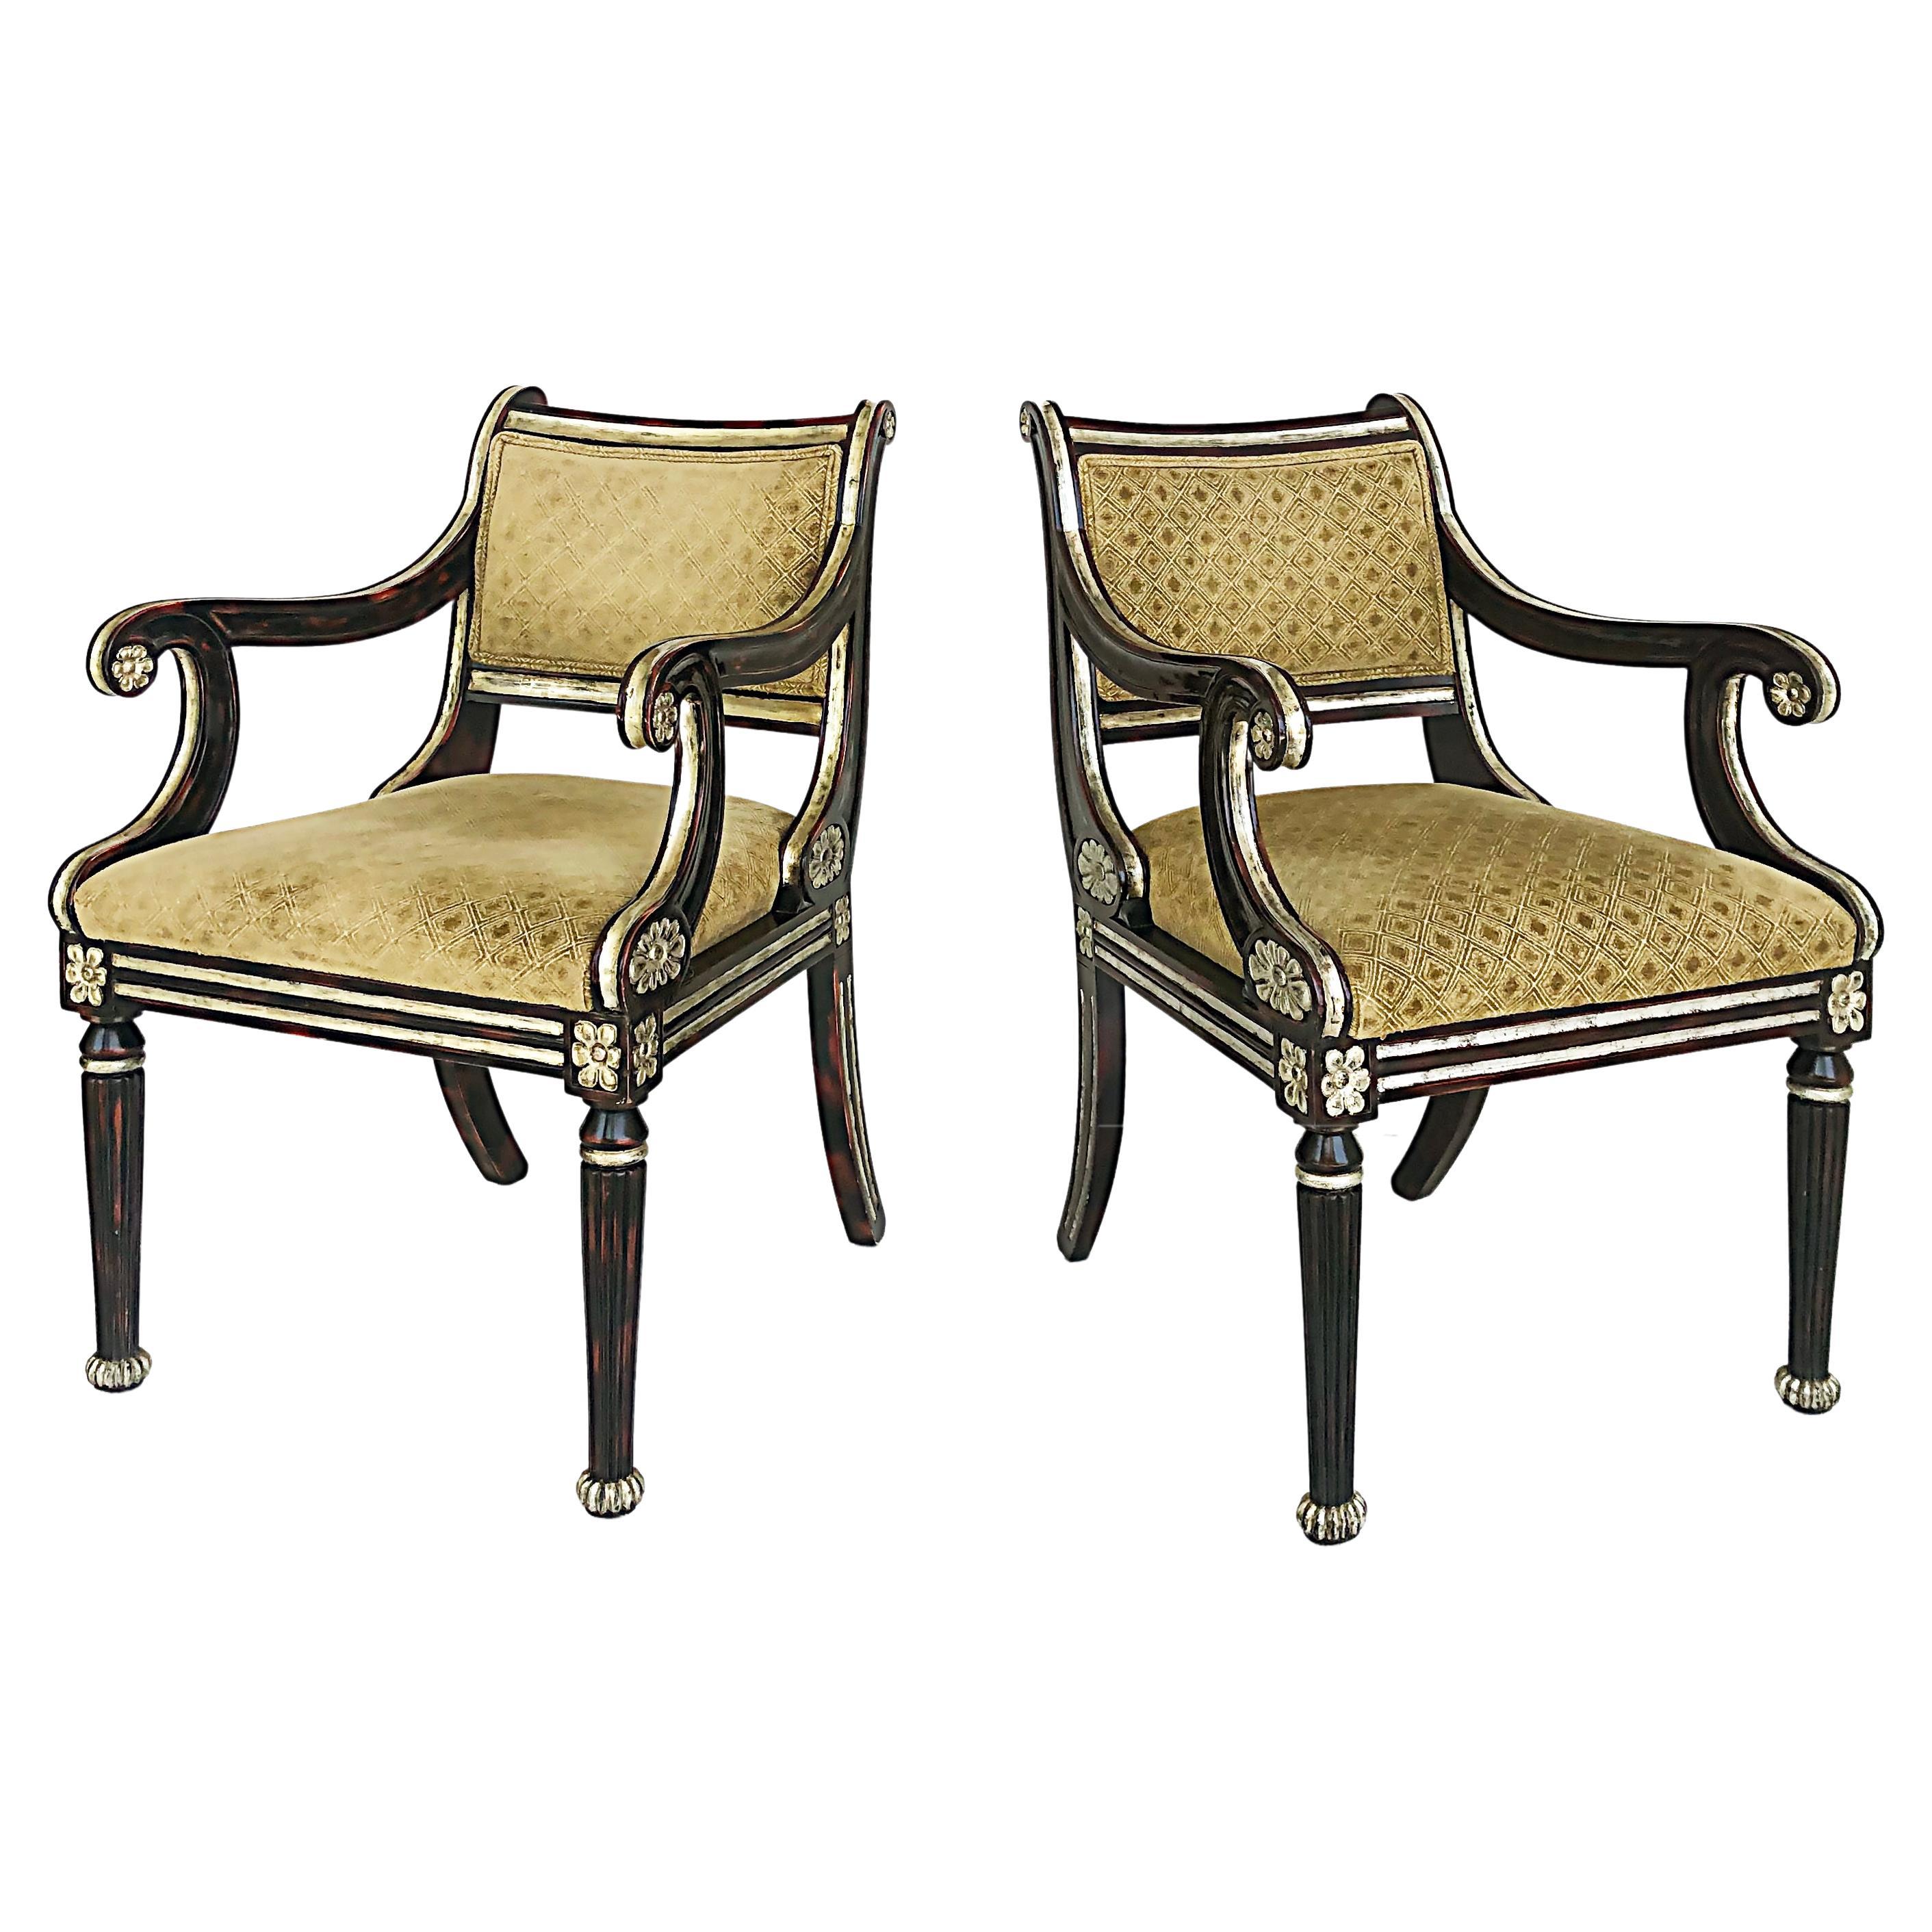  J. Robert Scott Mahogany and Silver Leaf Arm Chairs, Pair